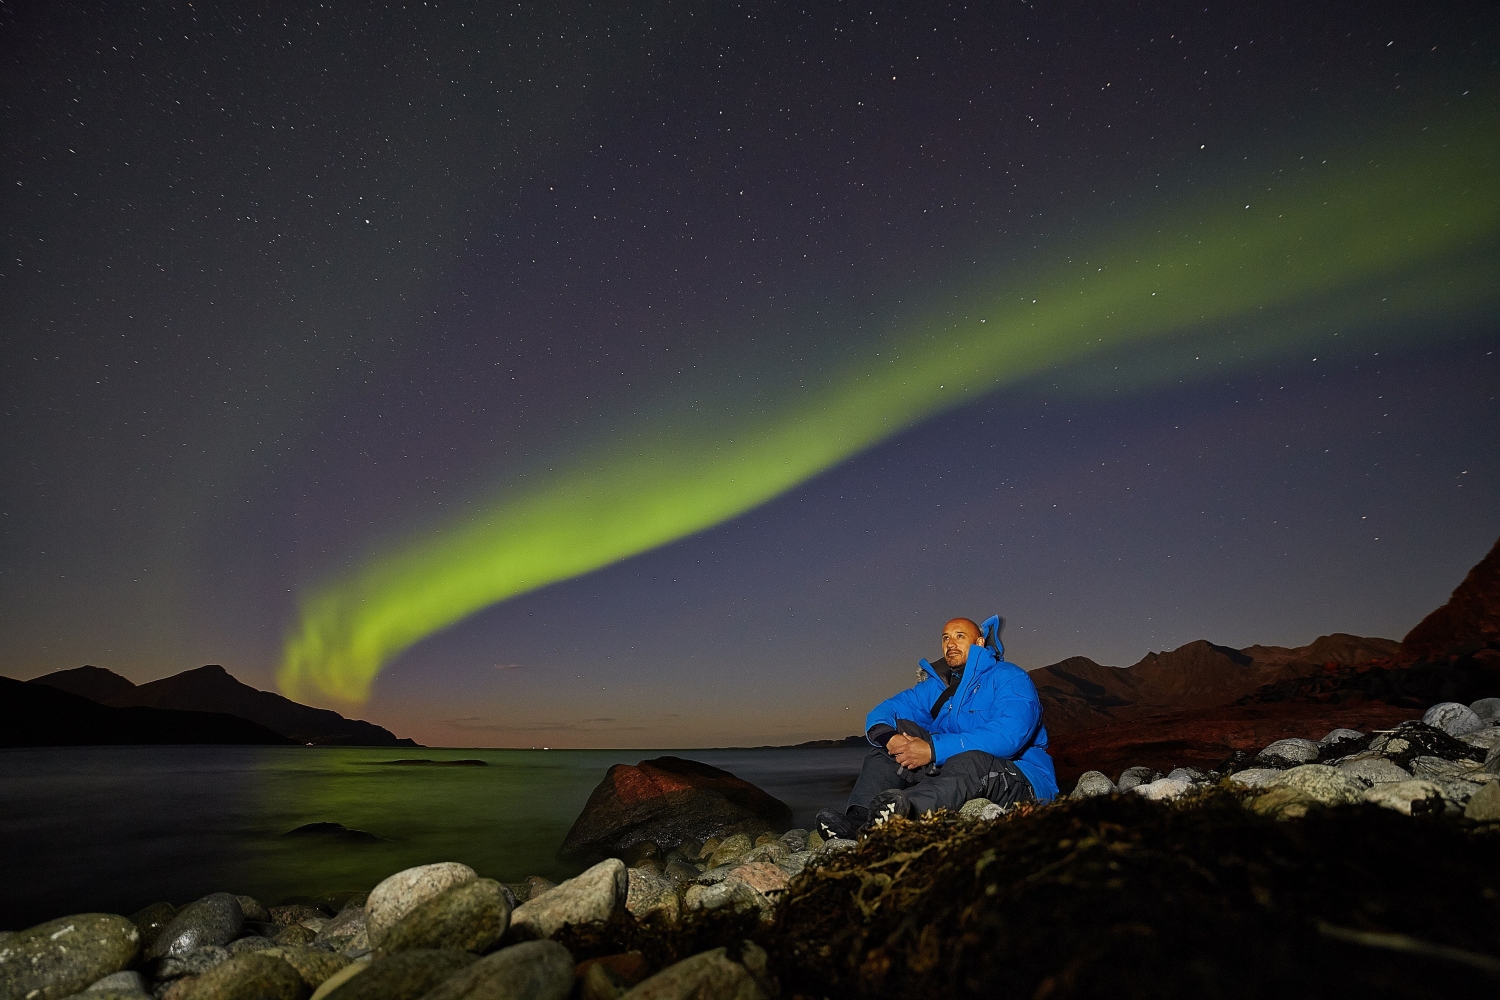 francisco is sitting by the sea with the aurora in the background